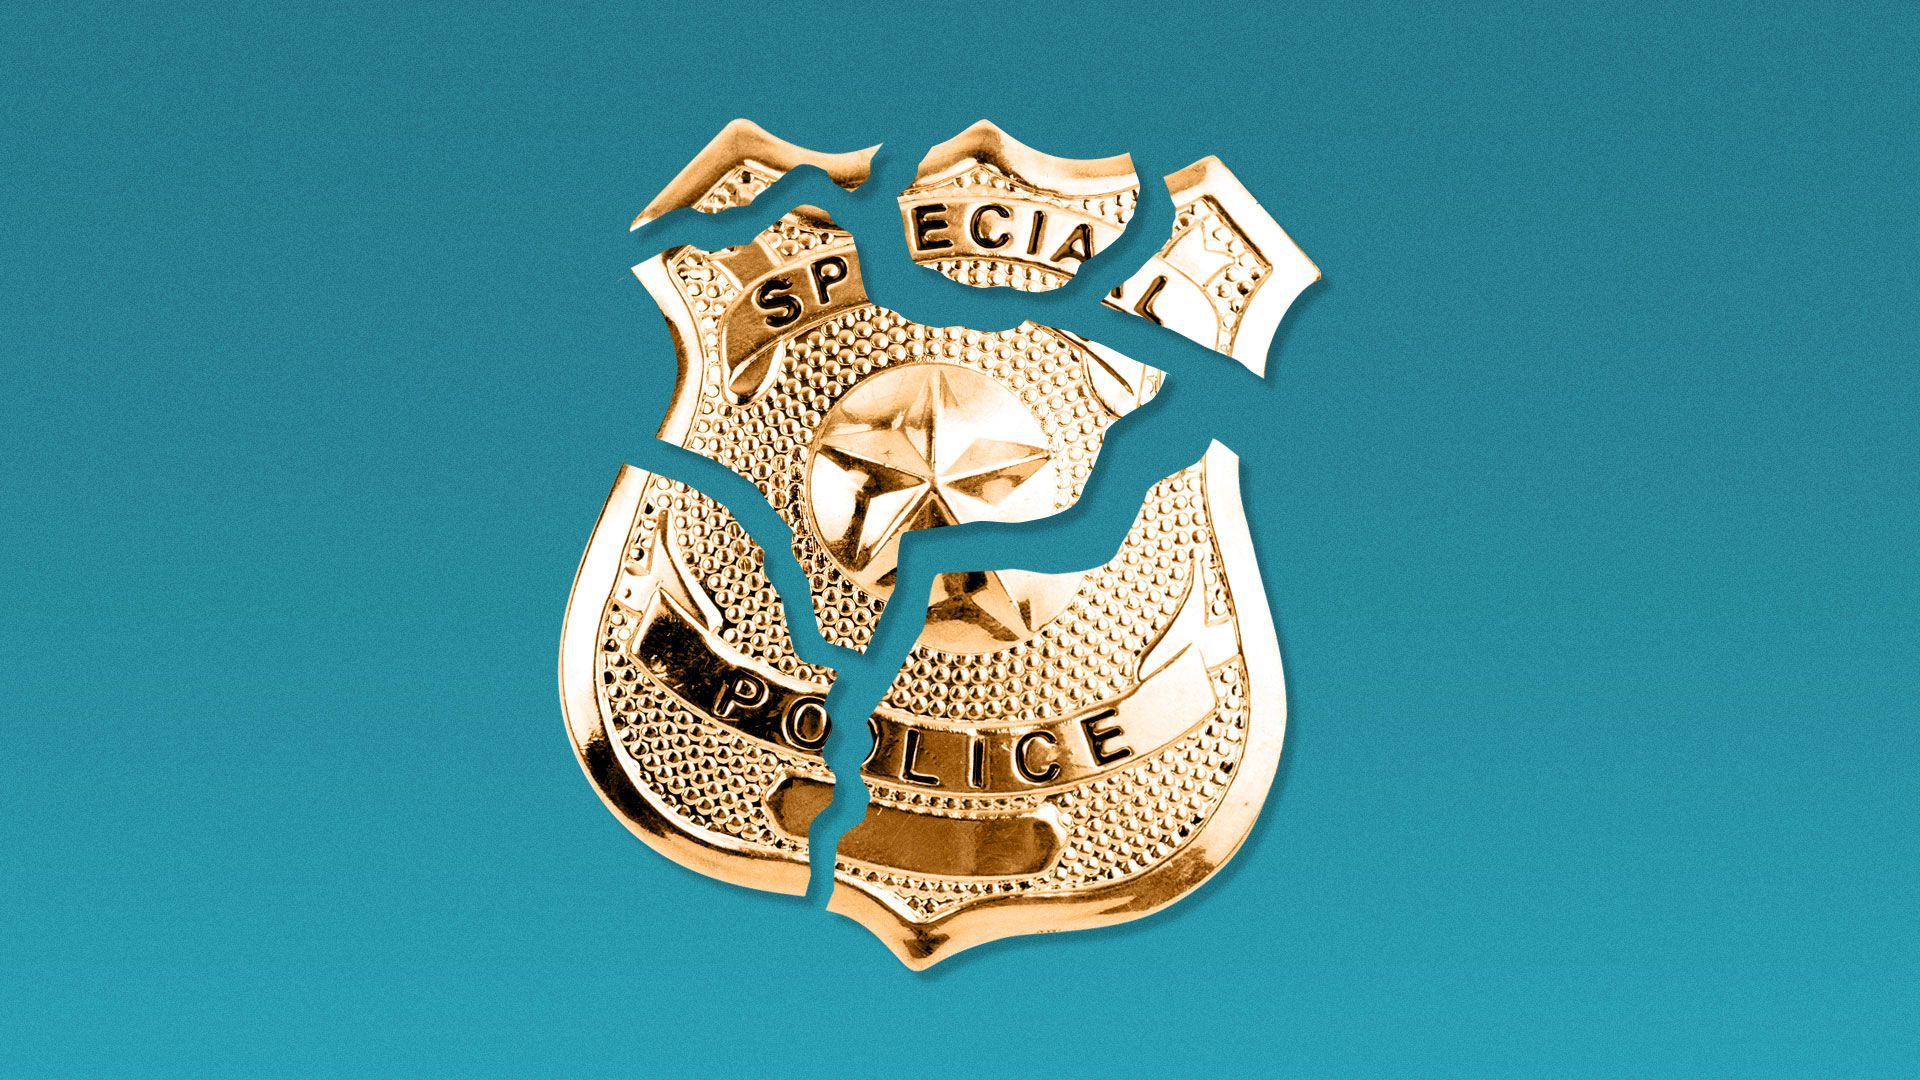 Illustration of a cracked and broken police badge